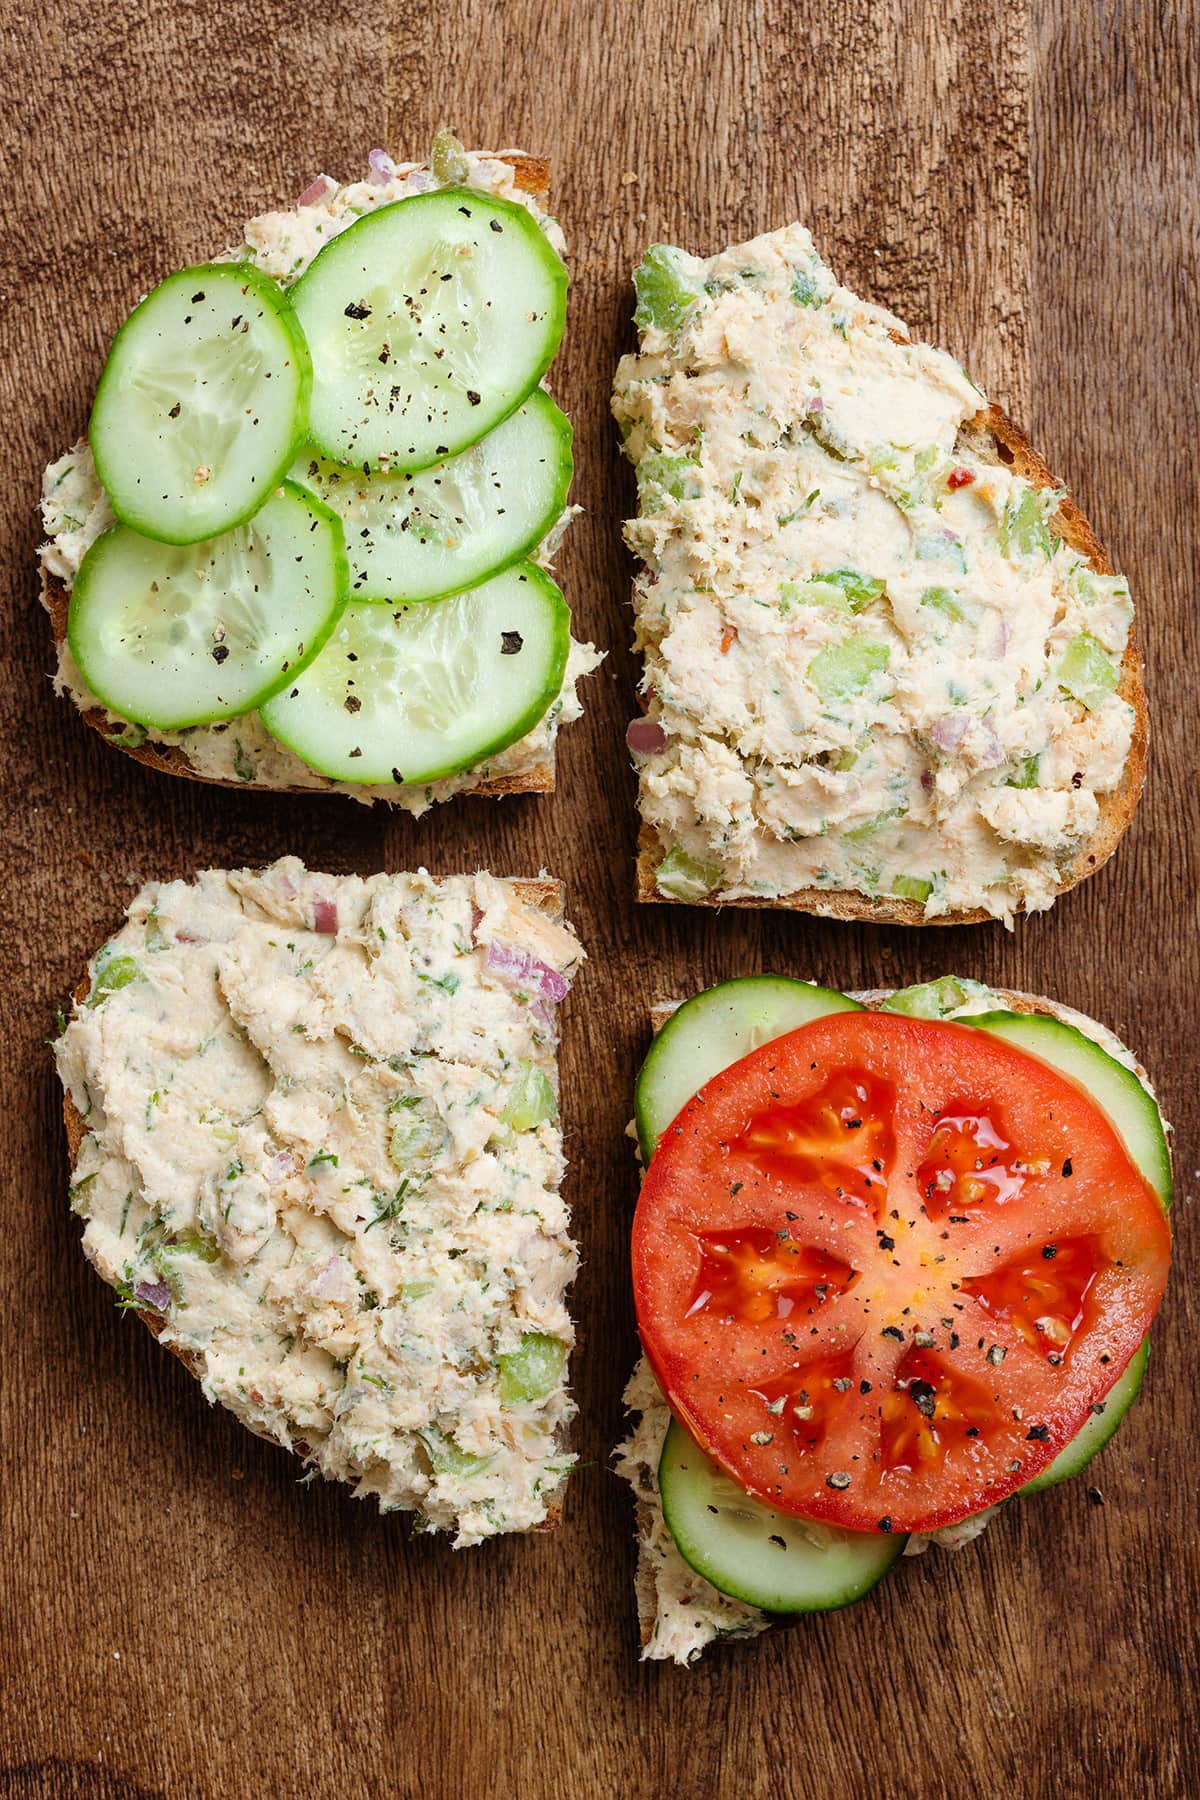 Slices of sourdough bread on a wooden cutting board topped with salmon spread, tomatoes, and cucumber.